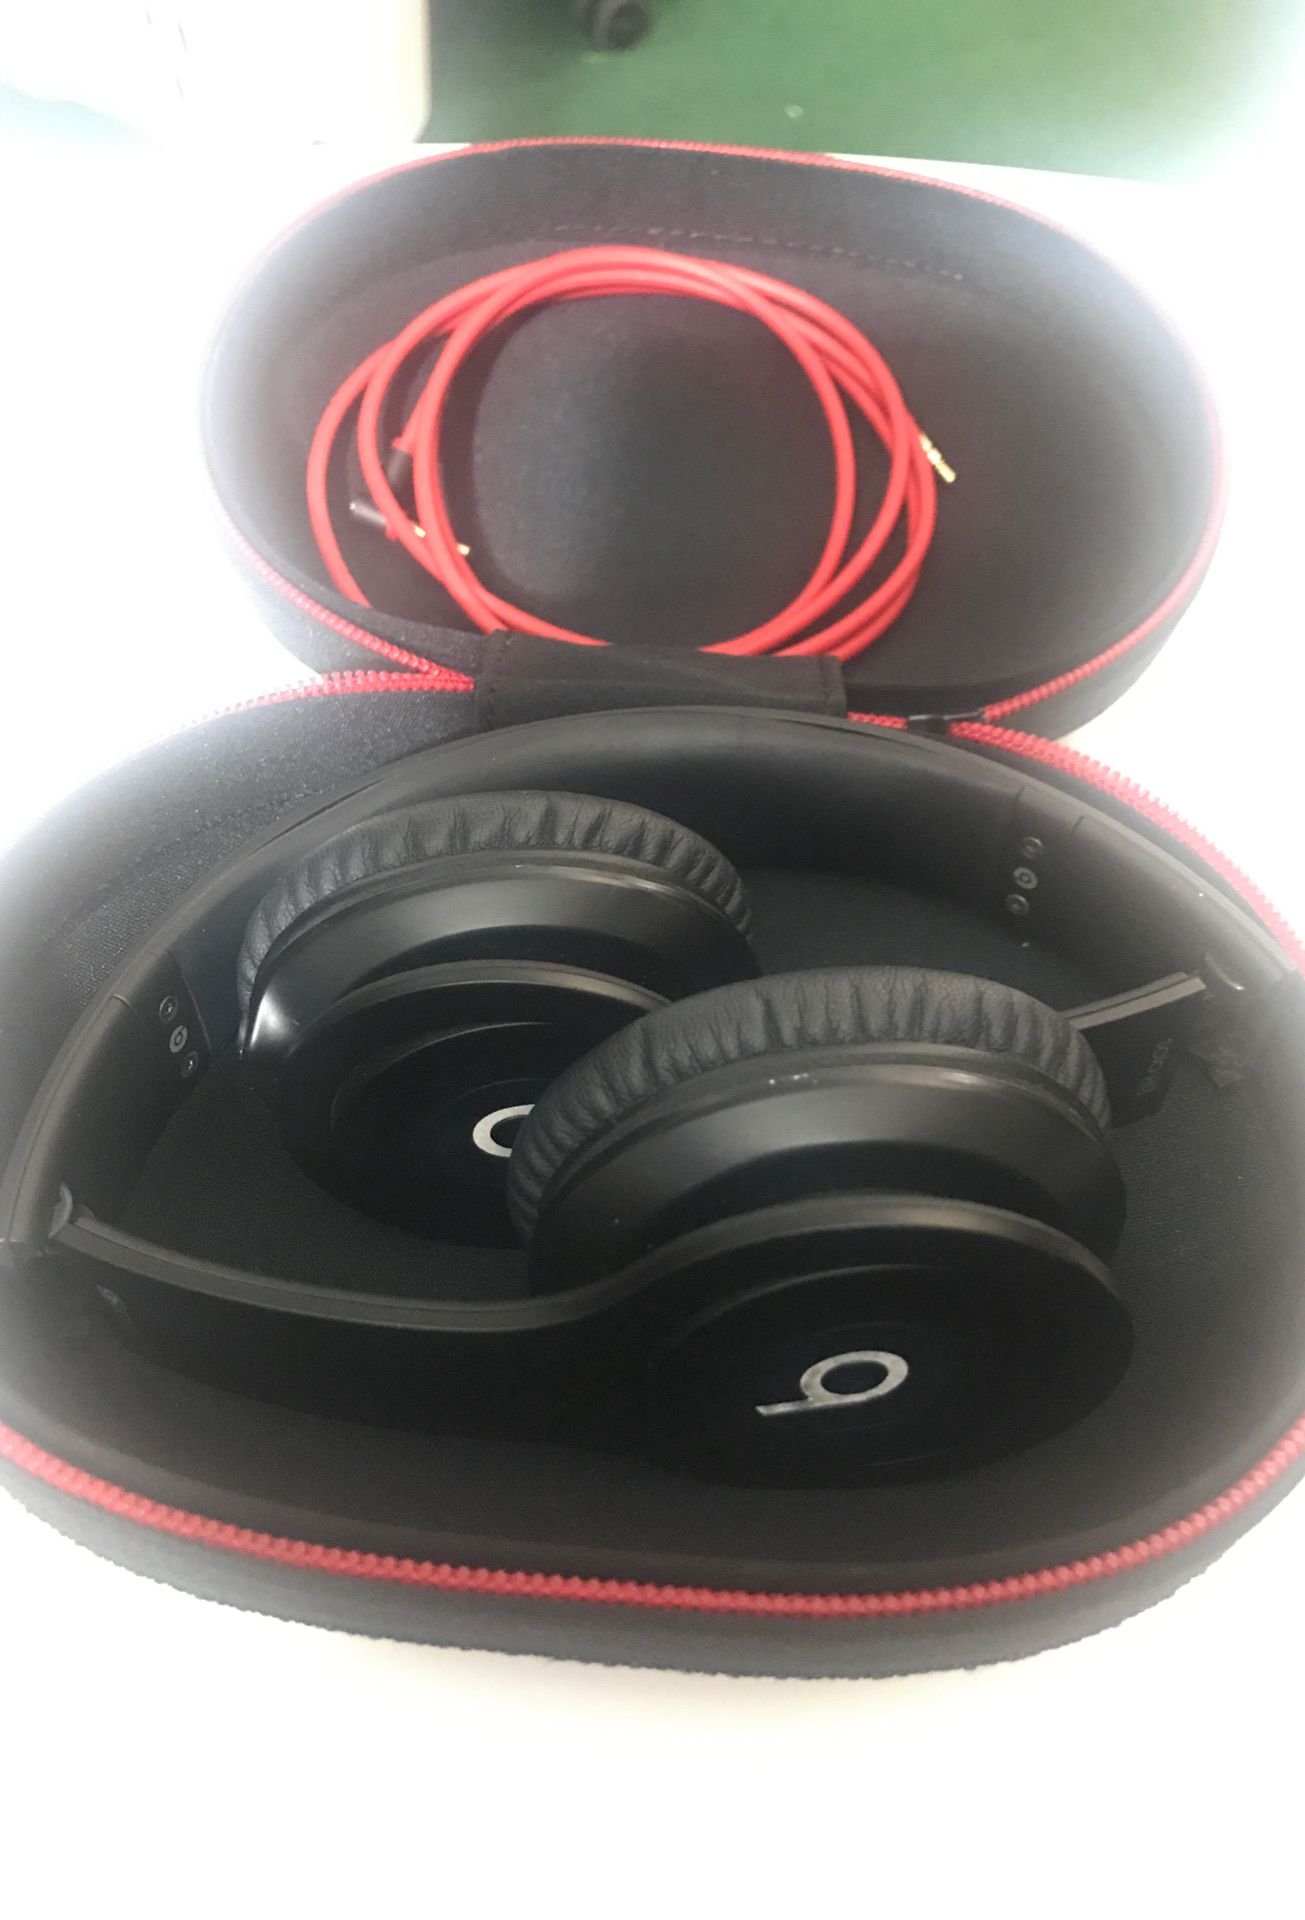 Beats by Dre solo first generation